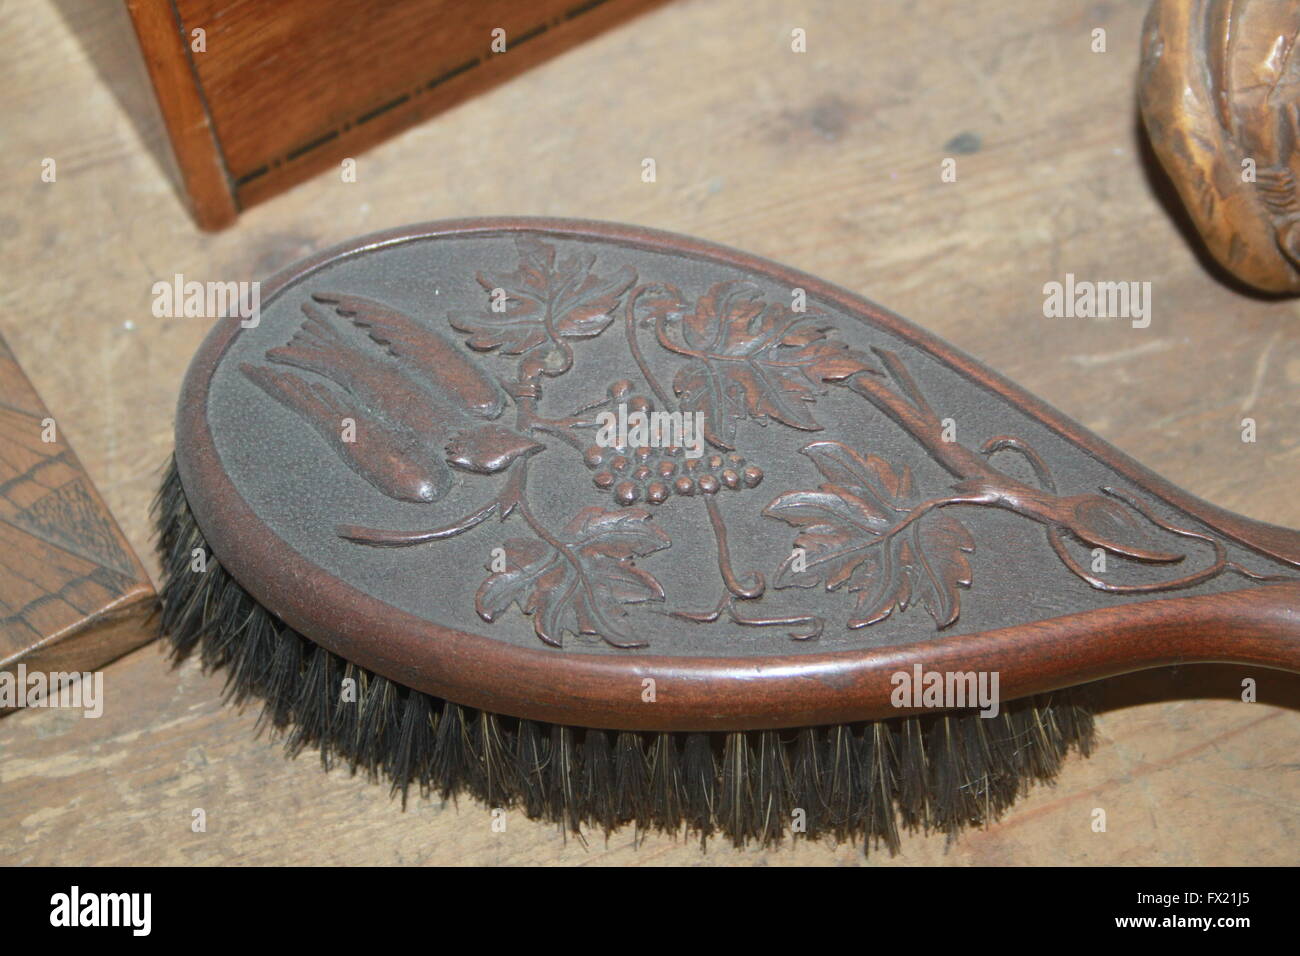 Close up of the carved bird and grape vine design in the back of an old wooden hair brush sat on a simple wooden board. Stock Photo